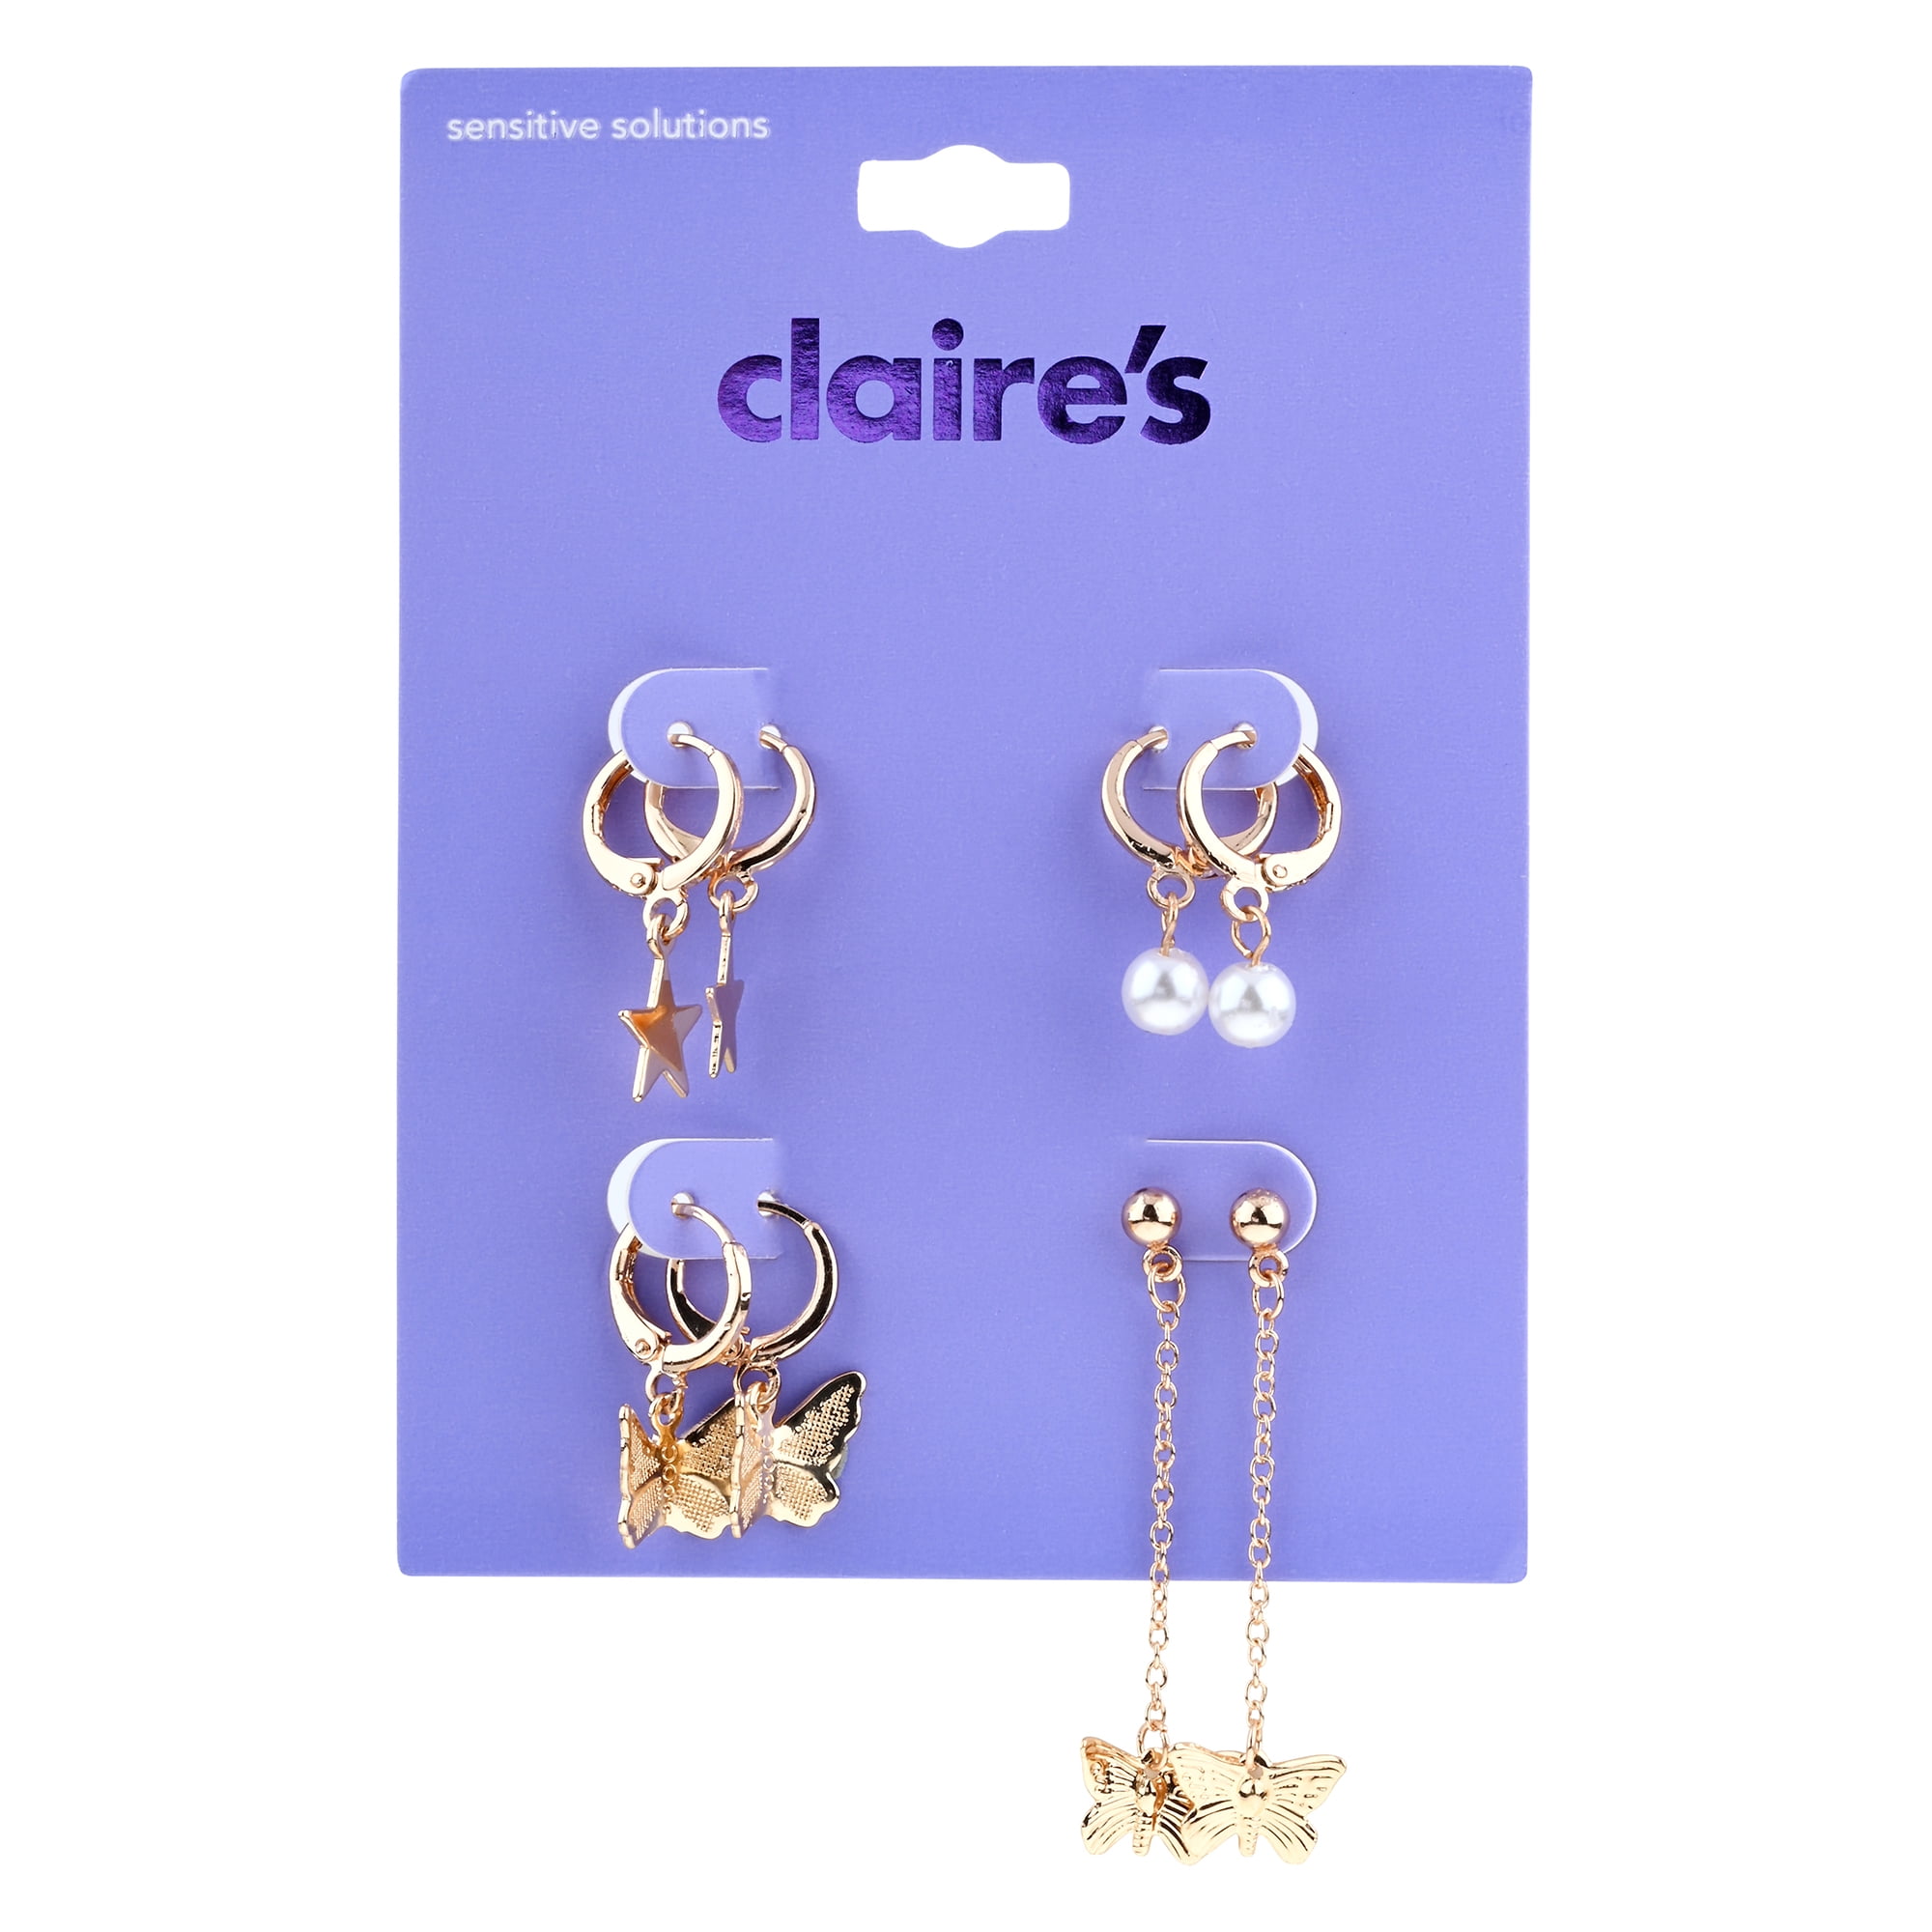 CLAIRES ELF EARRINGS Holiday Theme 100 Hypoallergenic Pierced Christmas   eBay